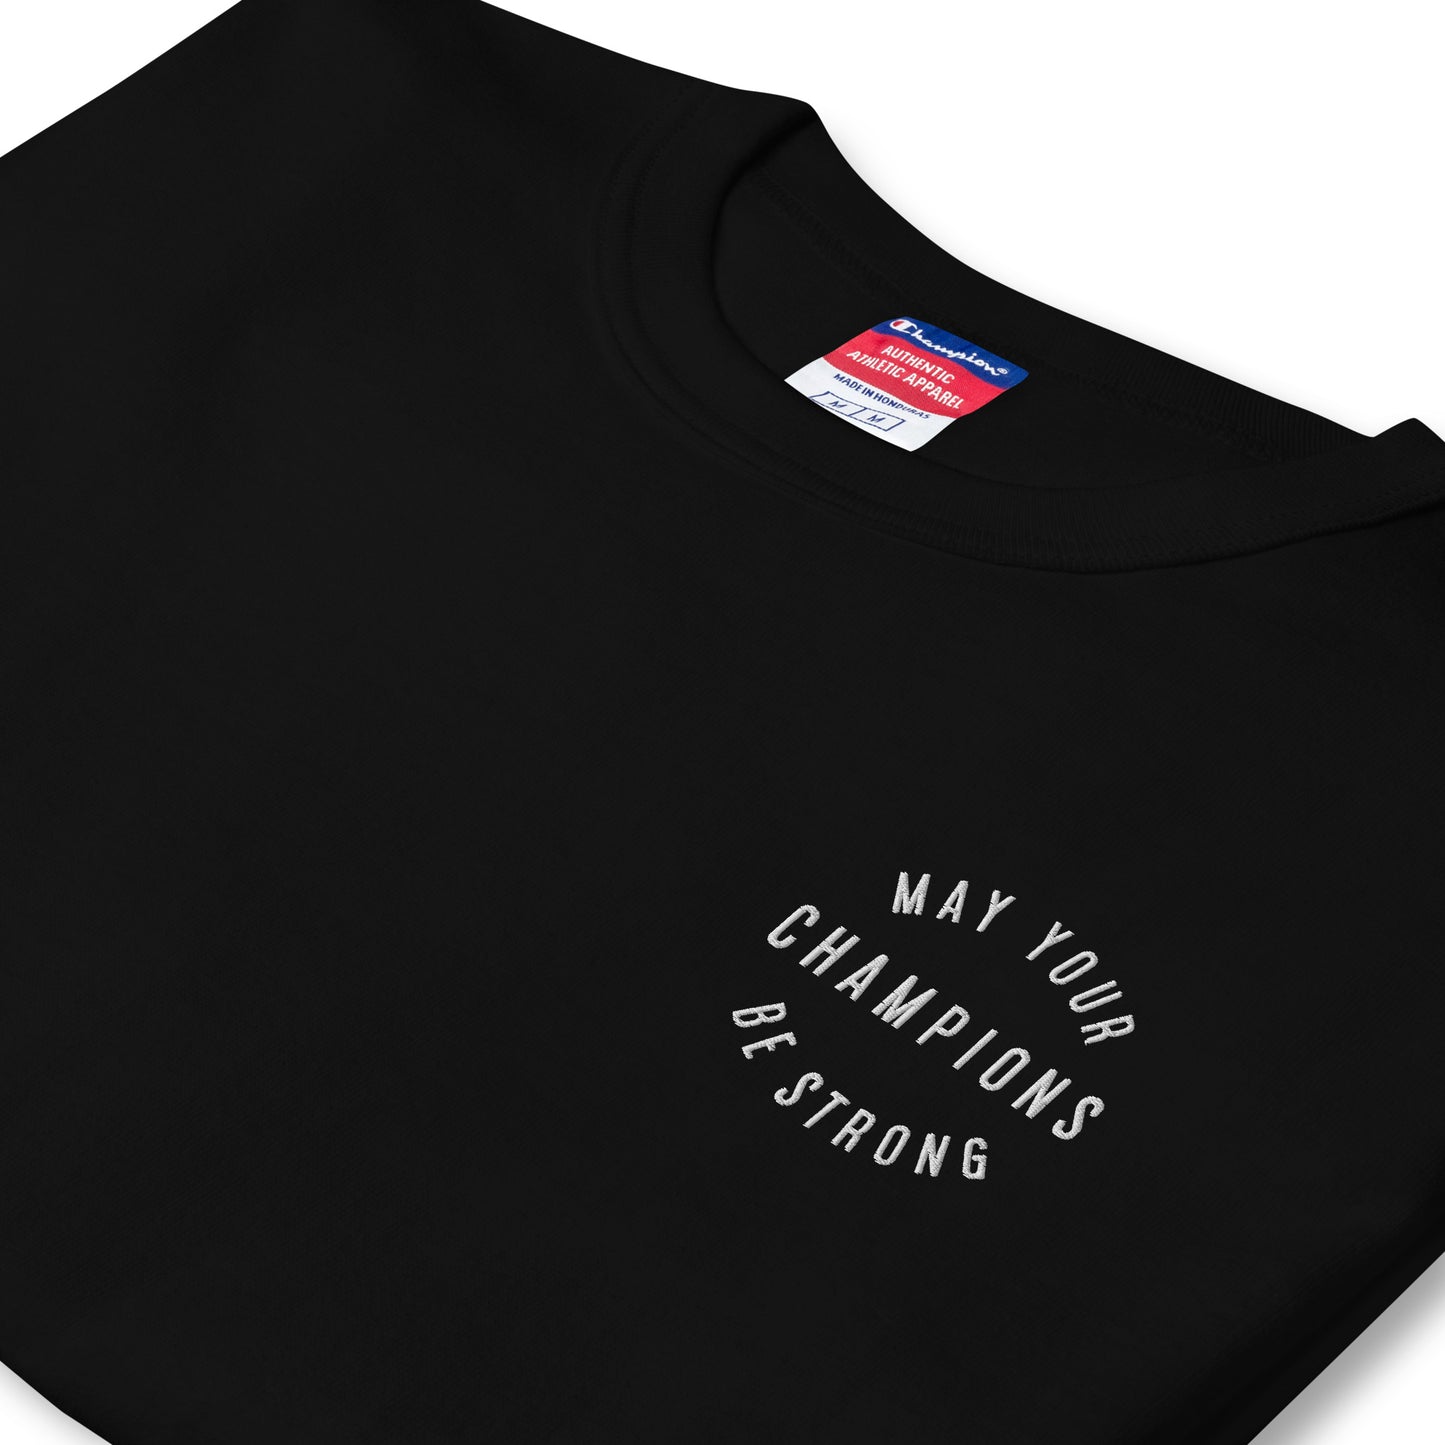 MEDDICC x Champion - May your Champions be Strong 💪 T-shirt